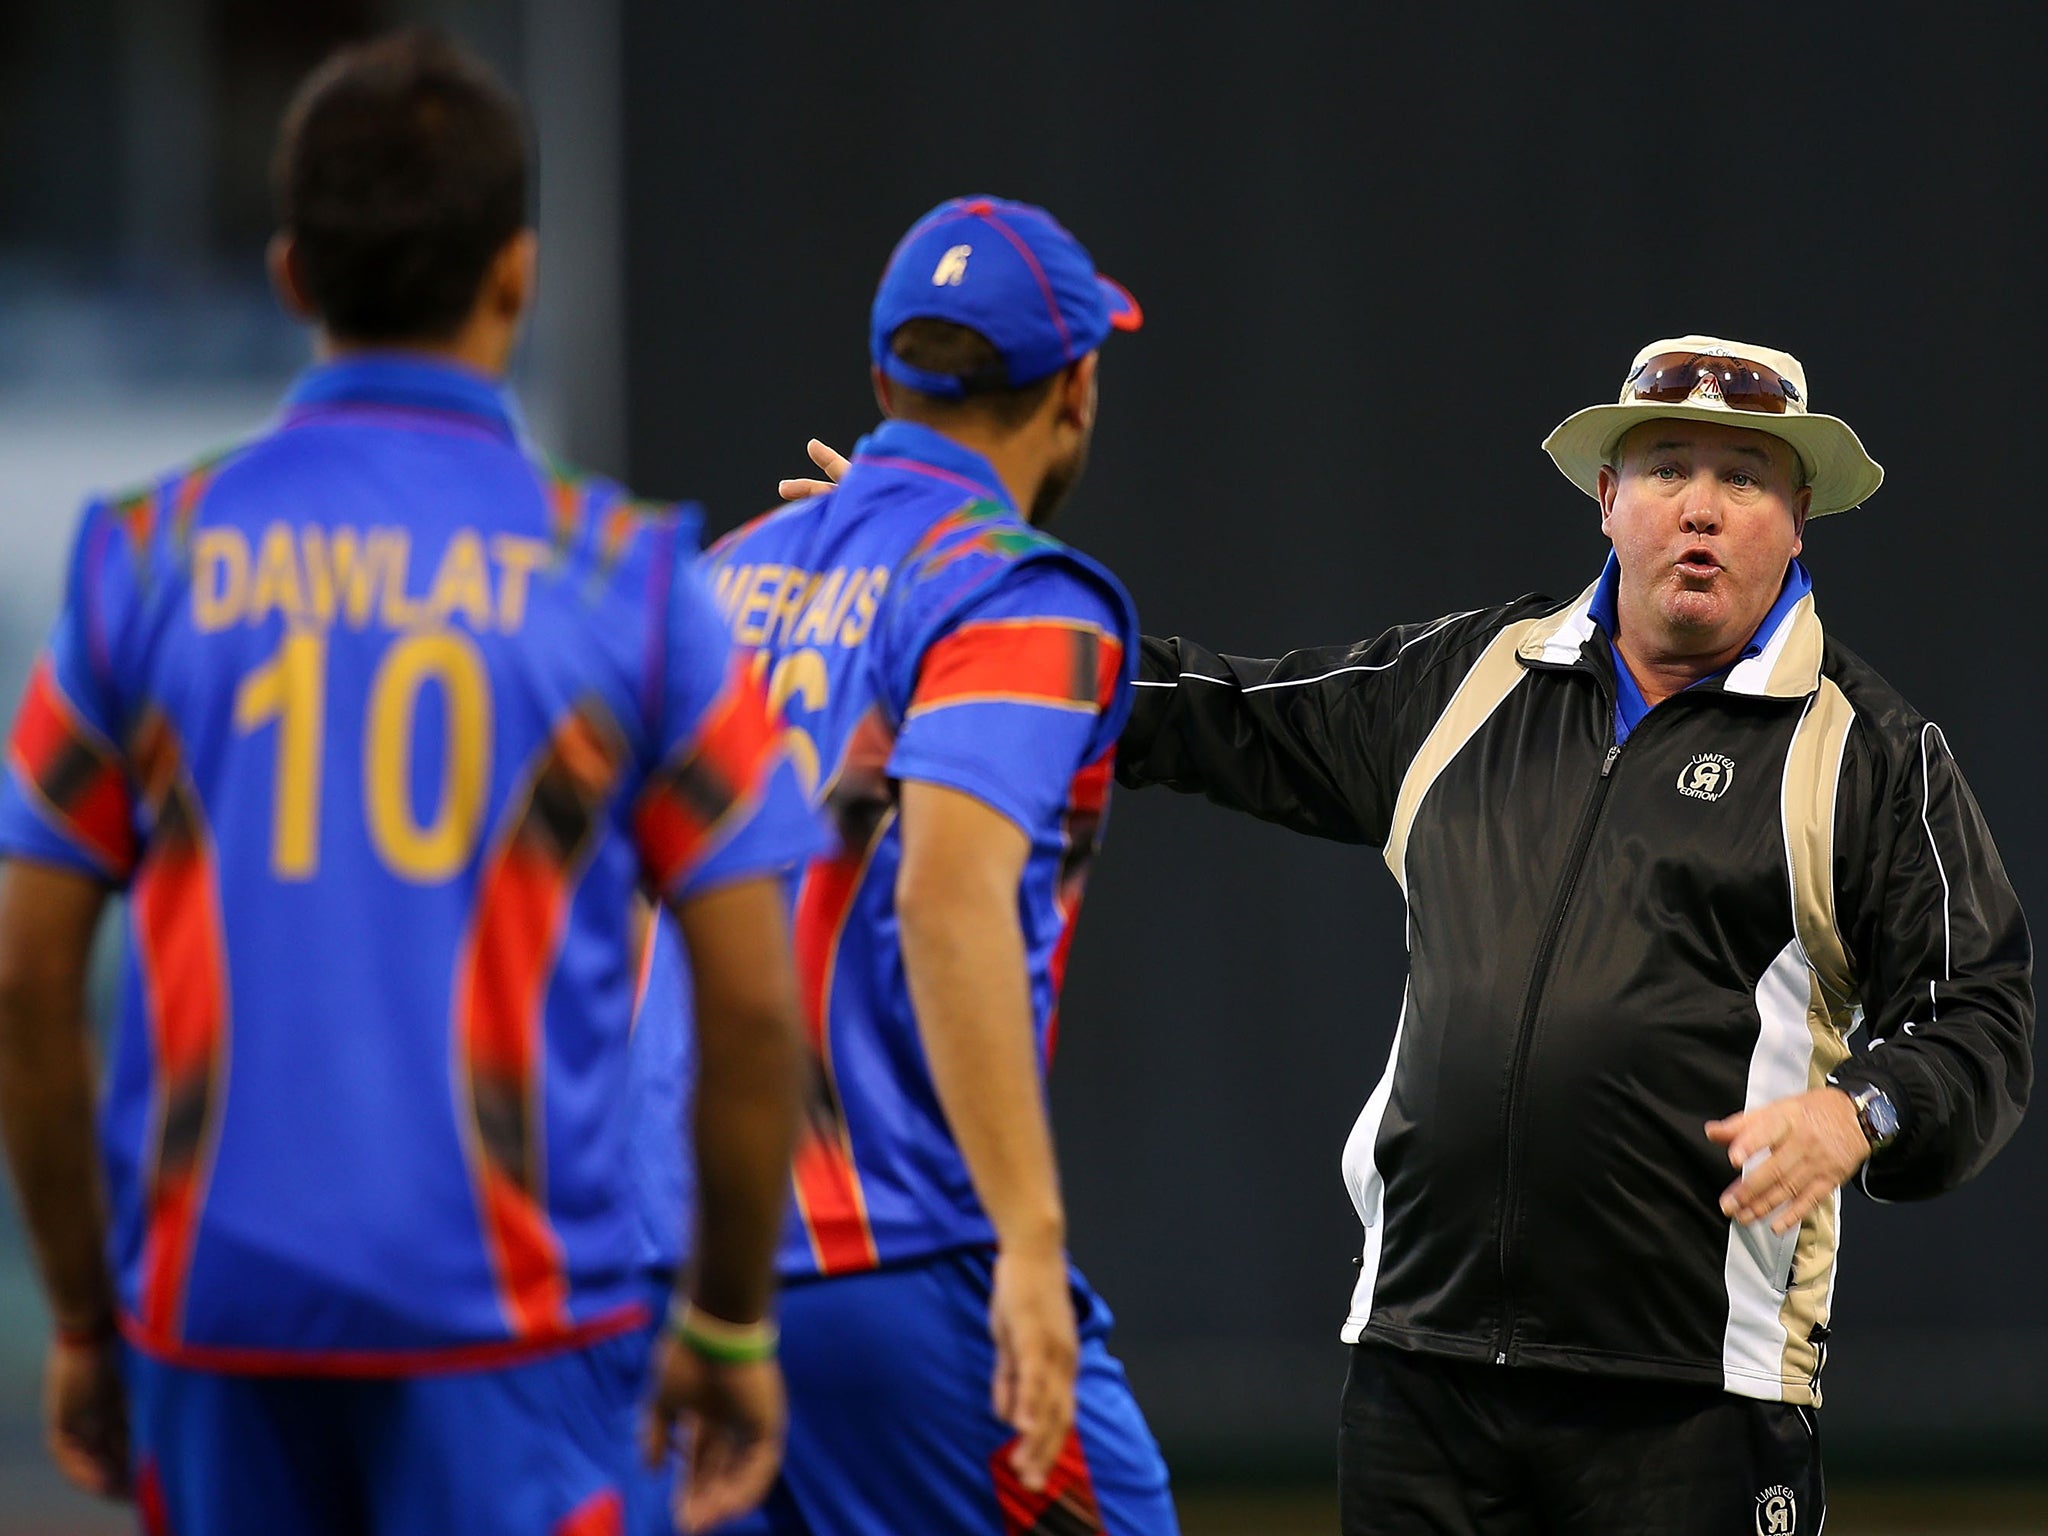 Andy Moles took over as coach of Afghanistan after working in the South African townships